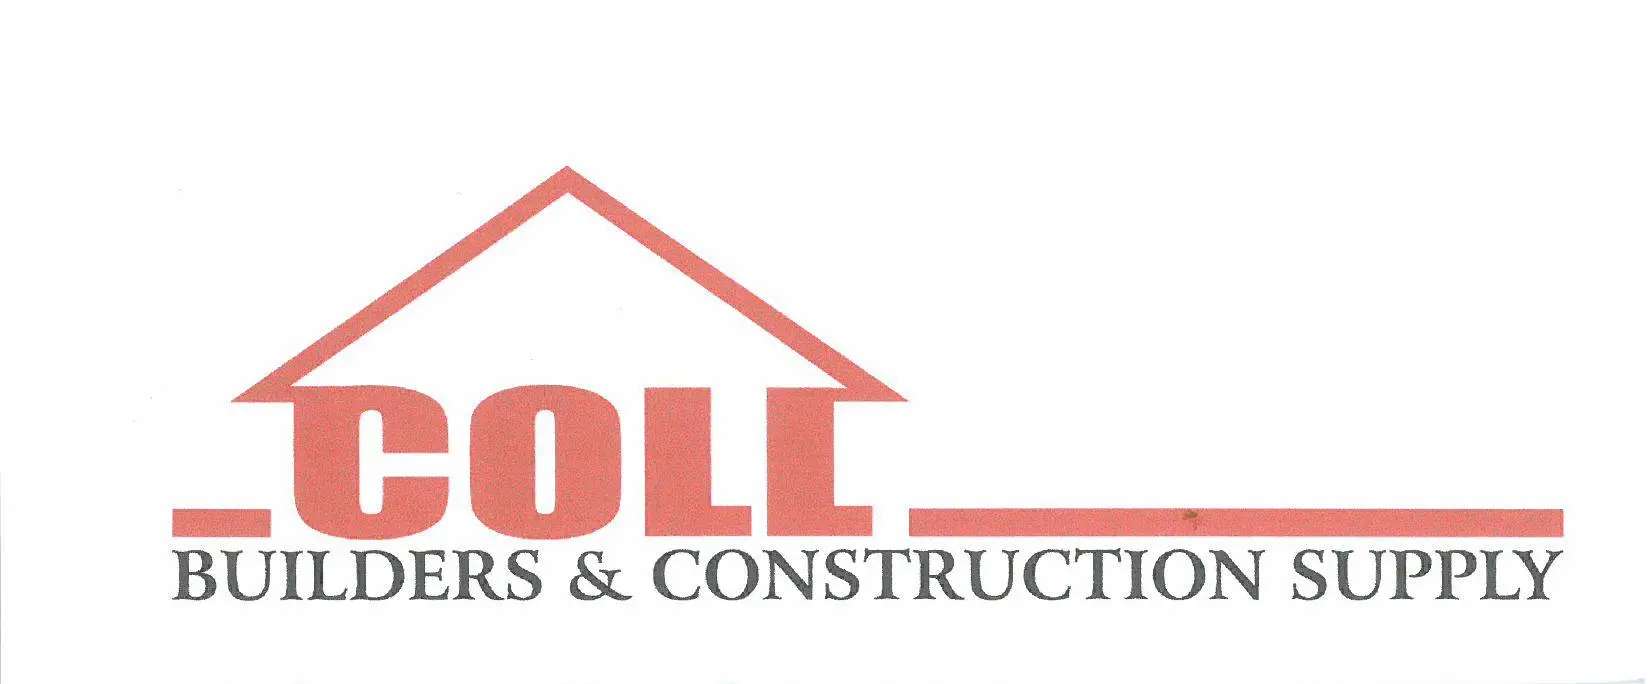 Coll-Builders-and-Construction-Supply-in-Bohol-logo